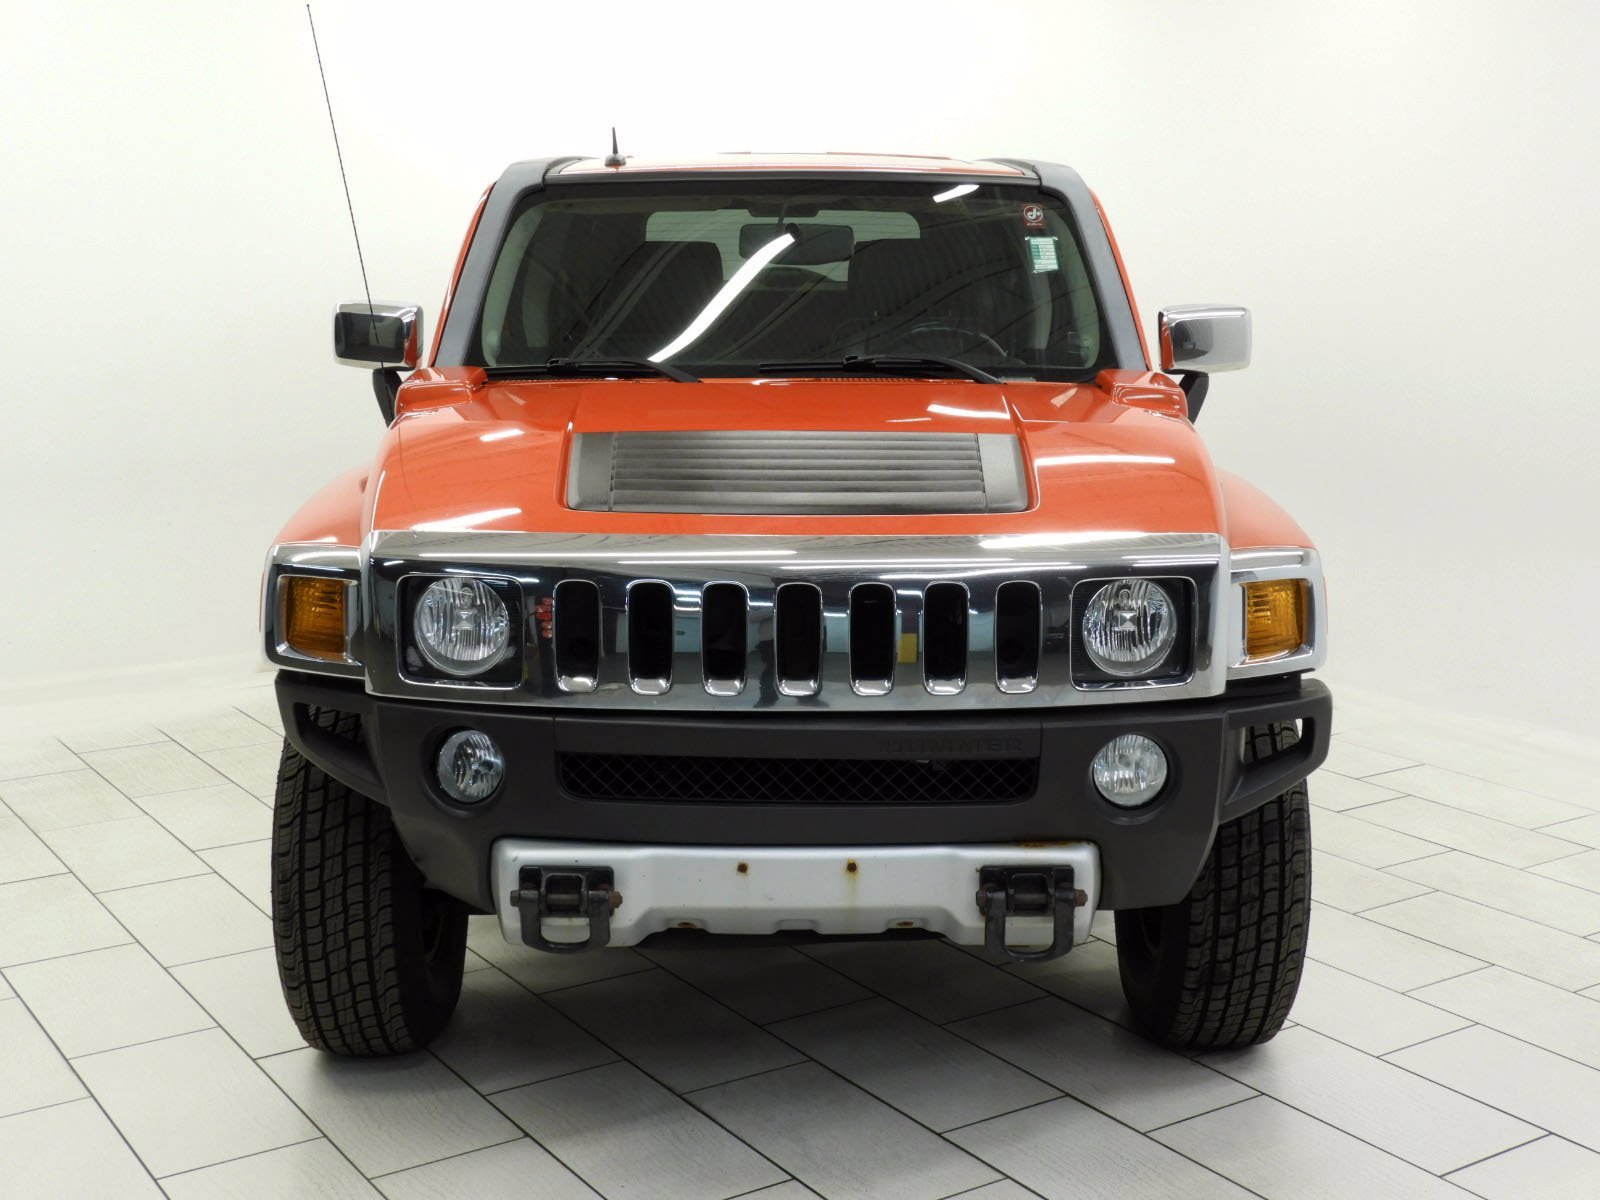 Used 2008 Hummer H3 H3 with VIN 5GTEN43E188186434 for sale in Charlotte, NC